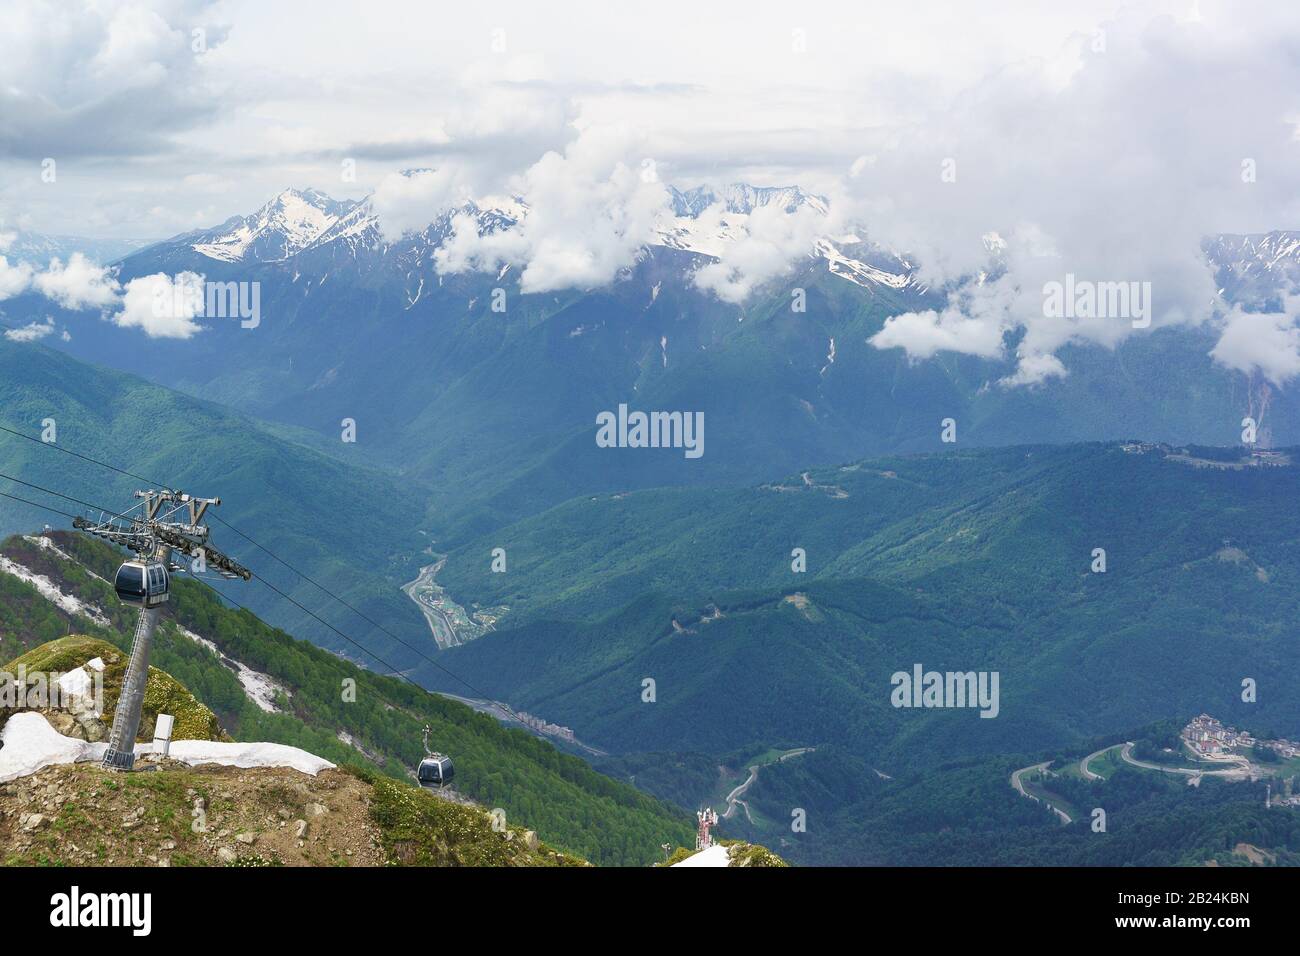 The cable car in ski resort, in summer a cloudy day. Mountain peaks hiding in the clouds Stock Photo